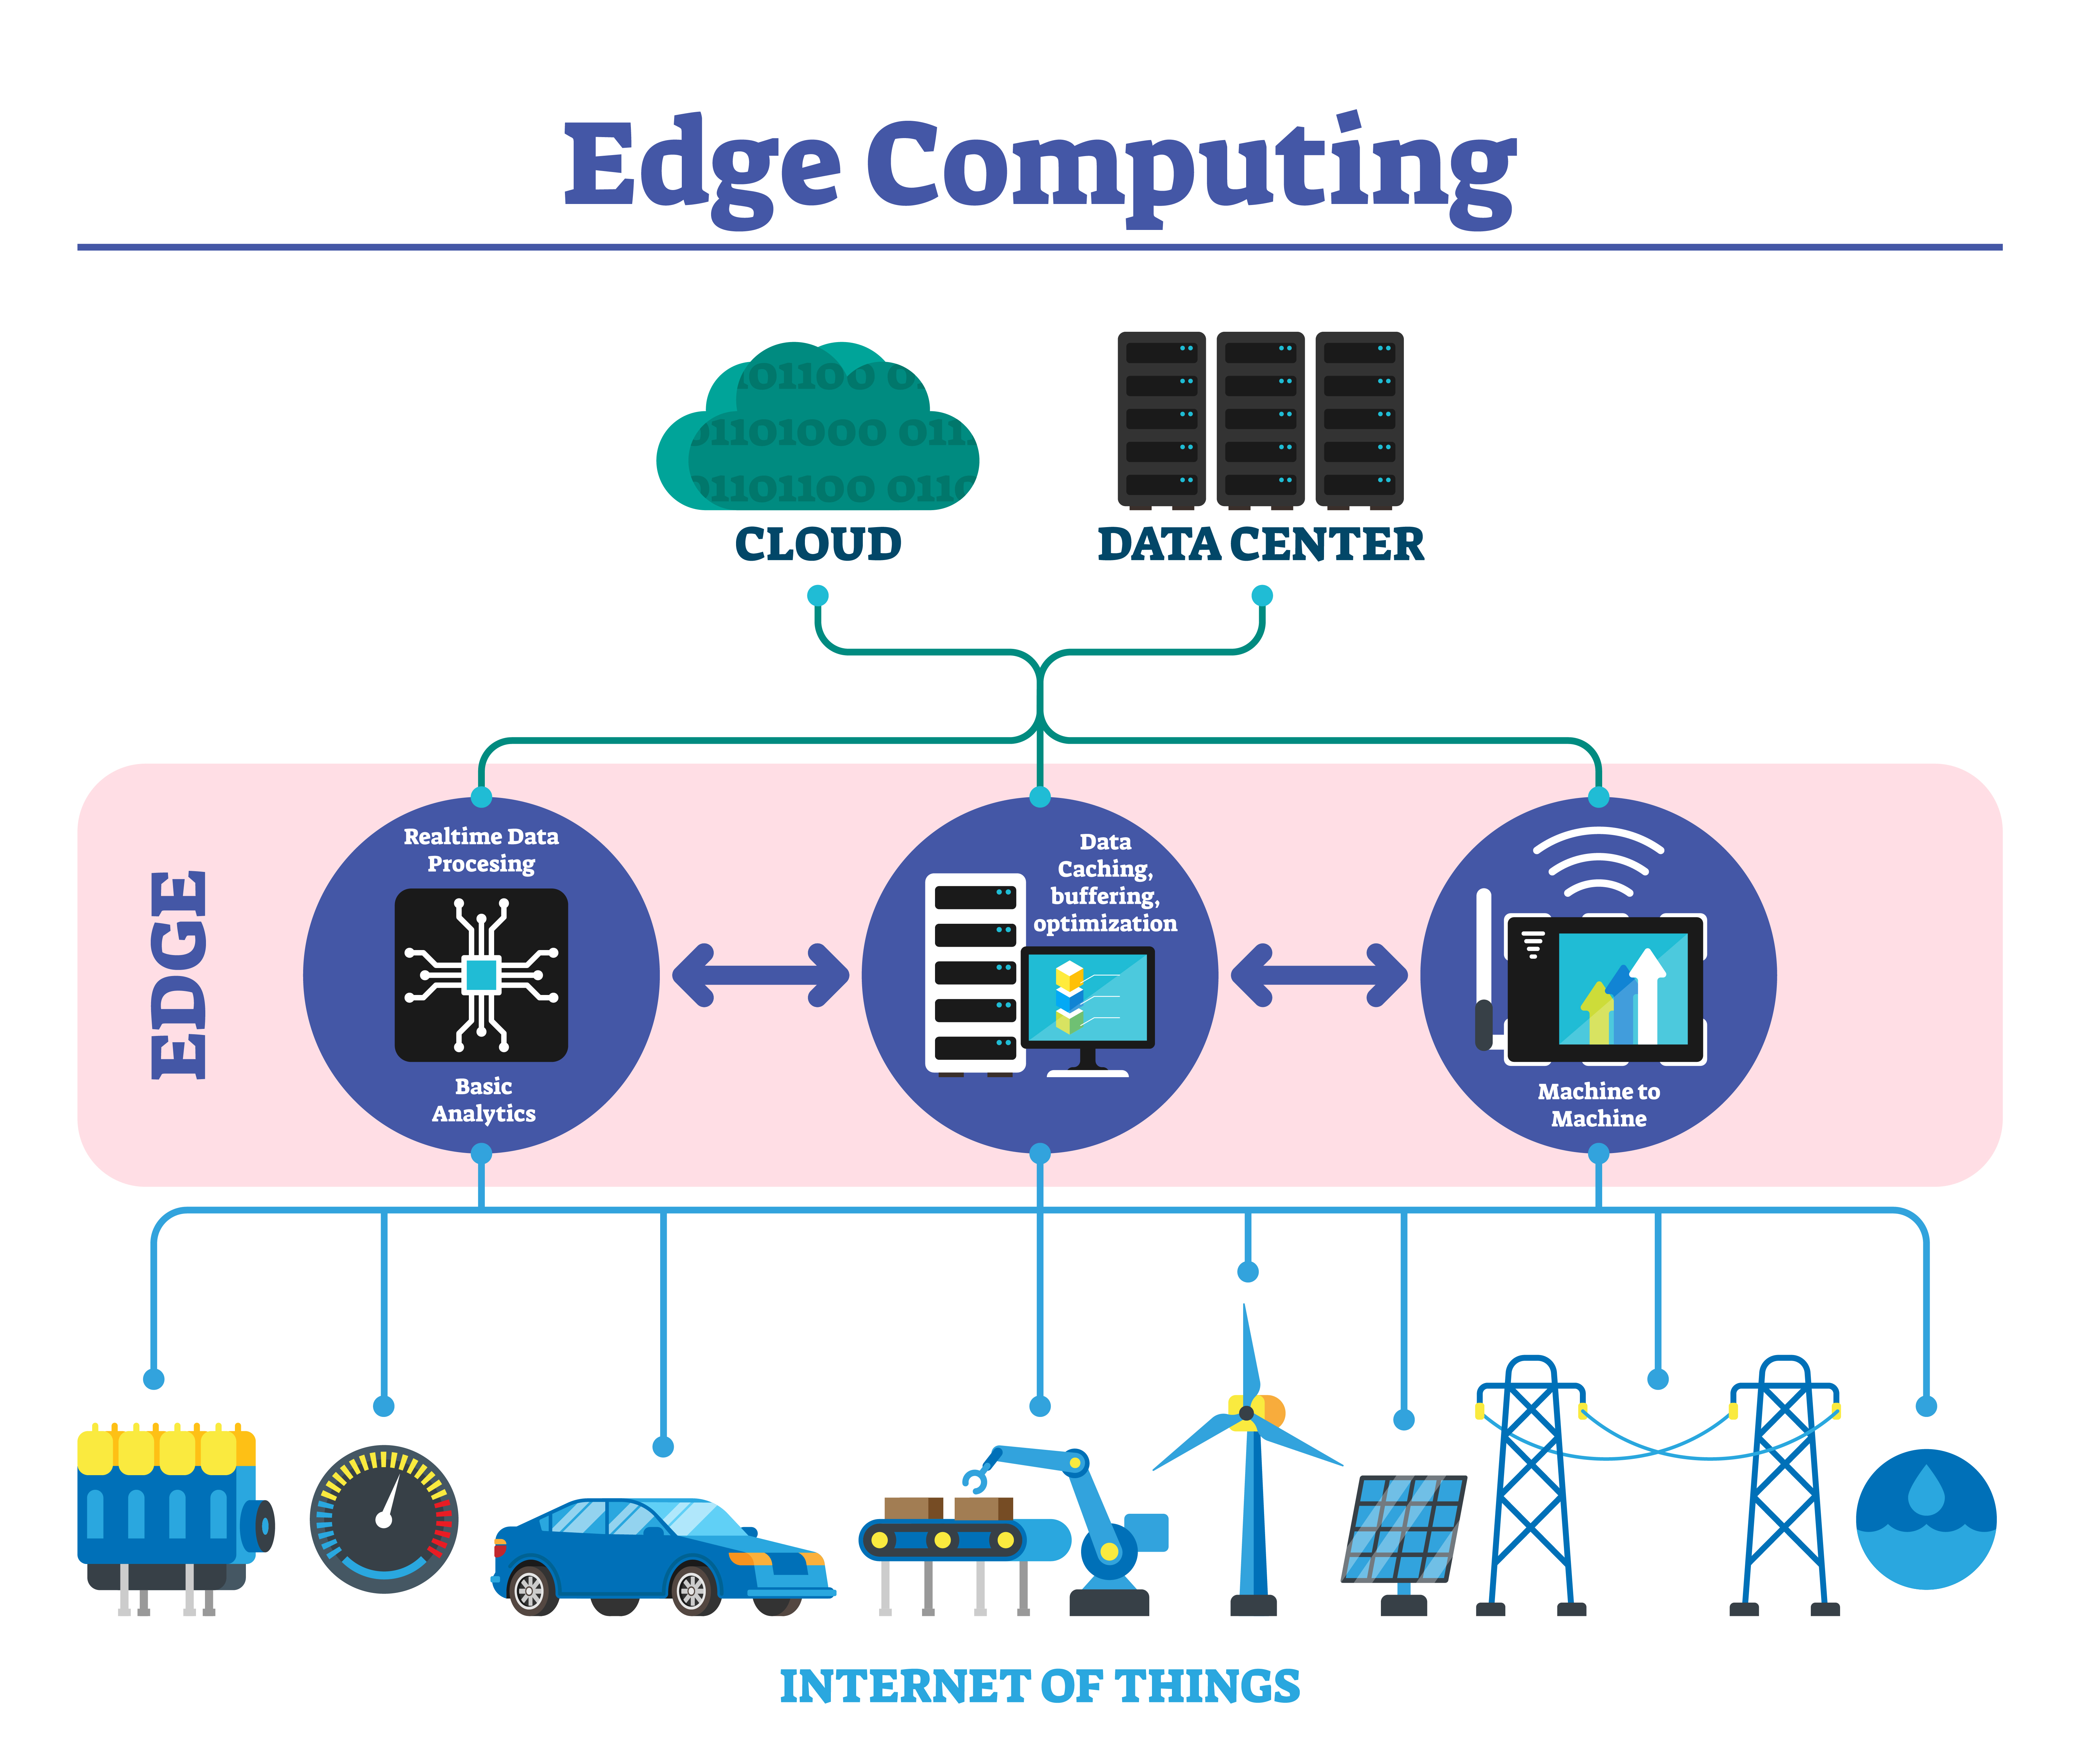 infographic showing the connections between cloud and data centers, edge computing, and internet of things.